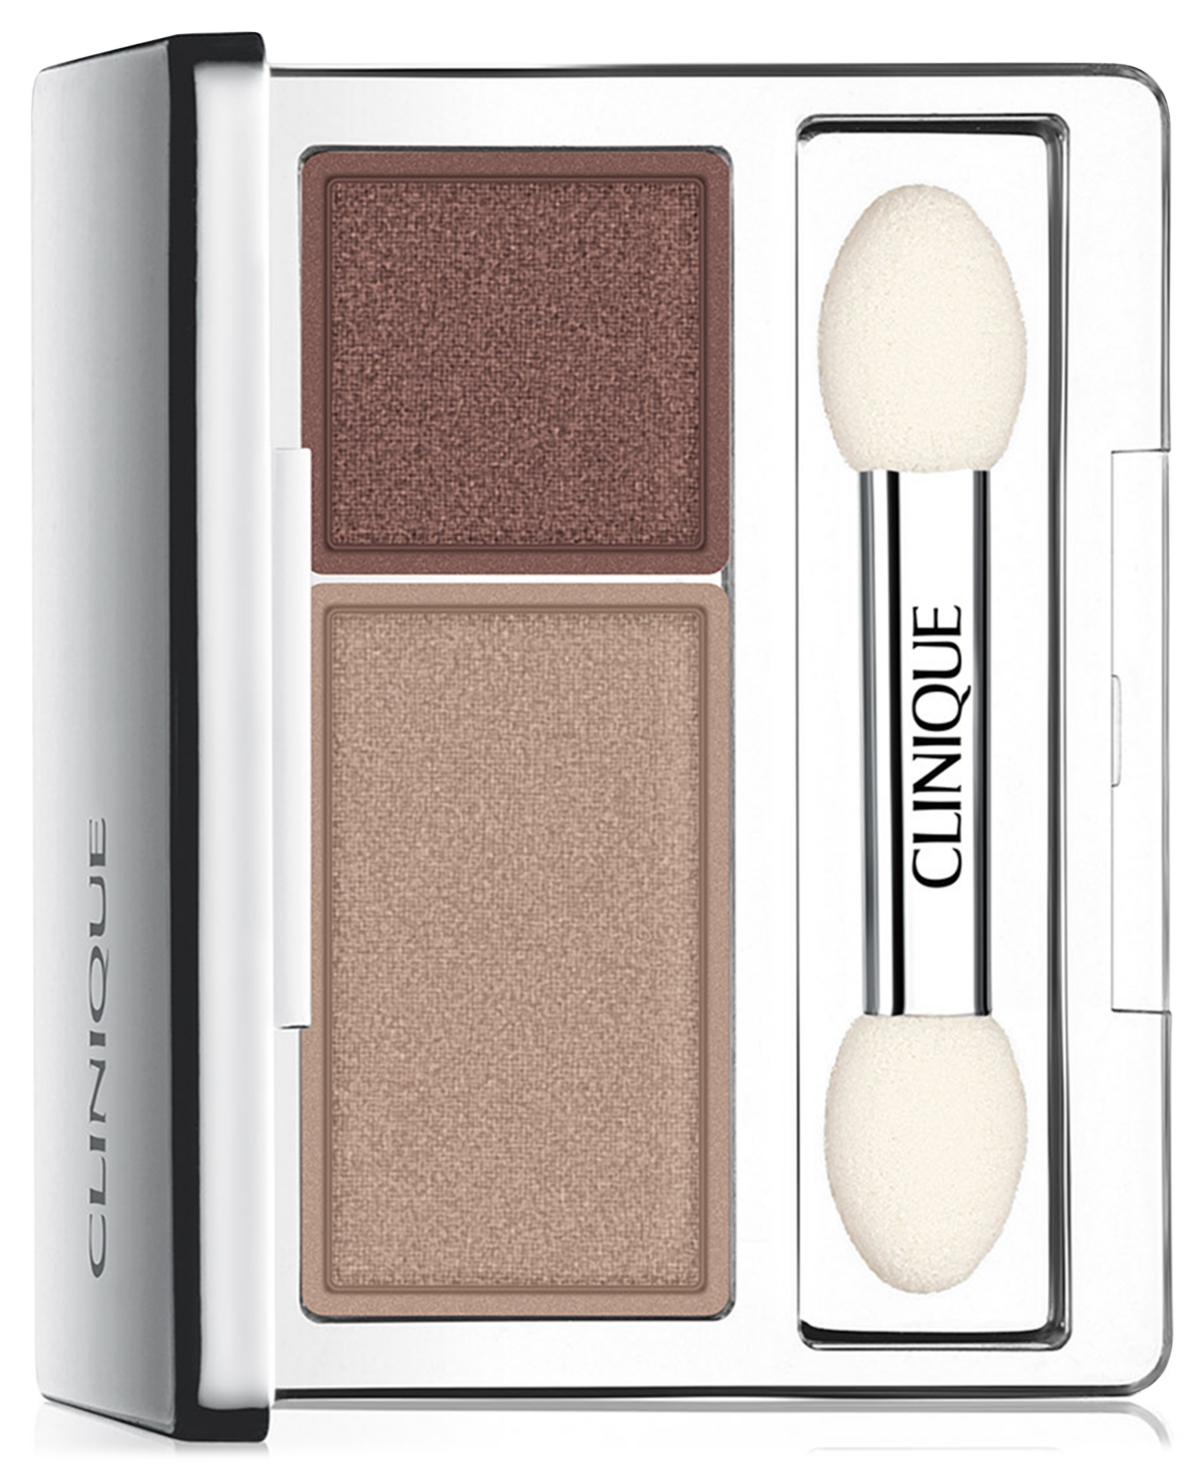 Clinique All About Shadow Duo Eyeshadow, 0.12 Oz. In Ivory Bisque,bronze Satin